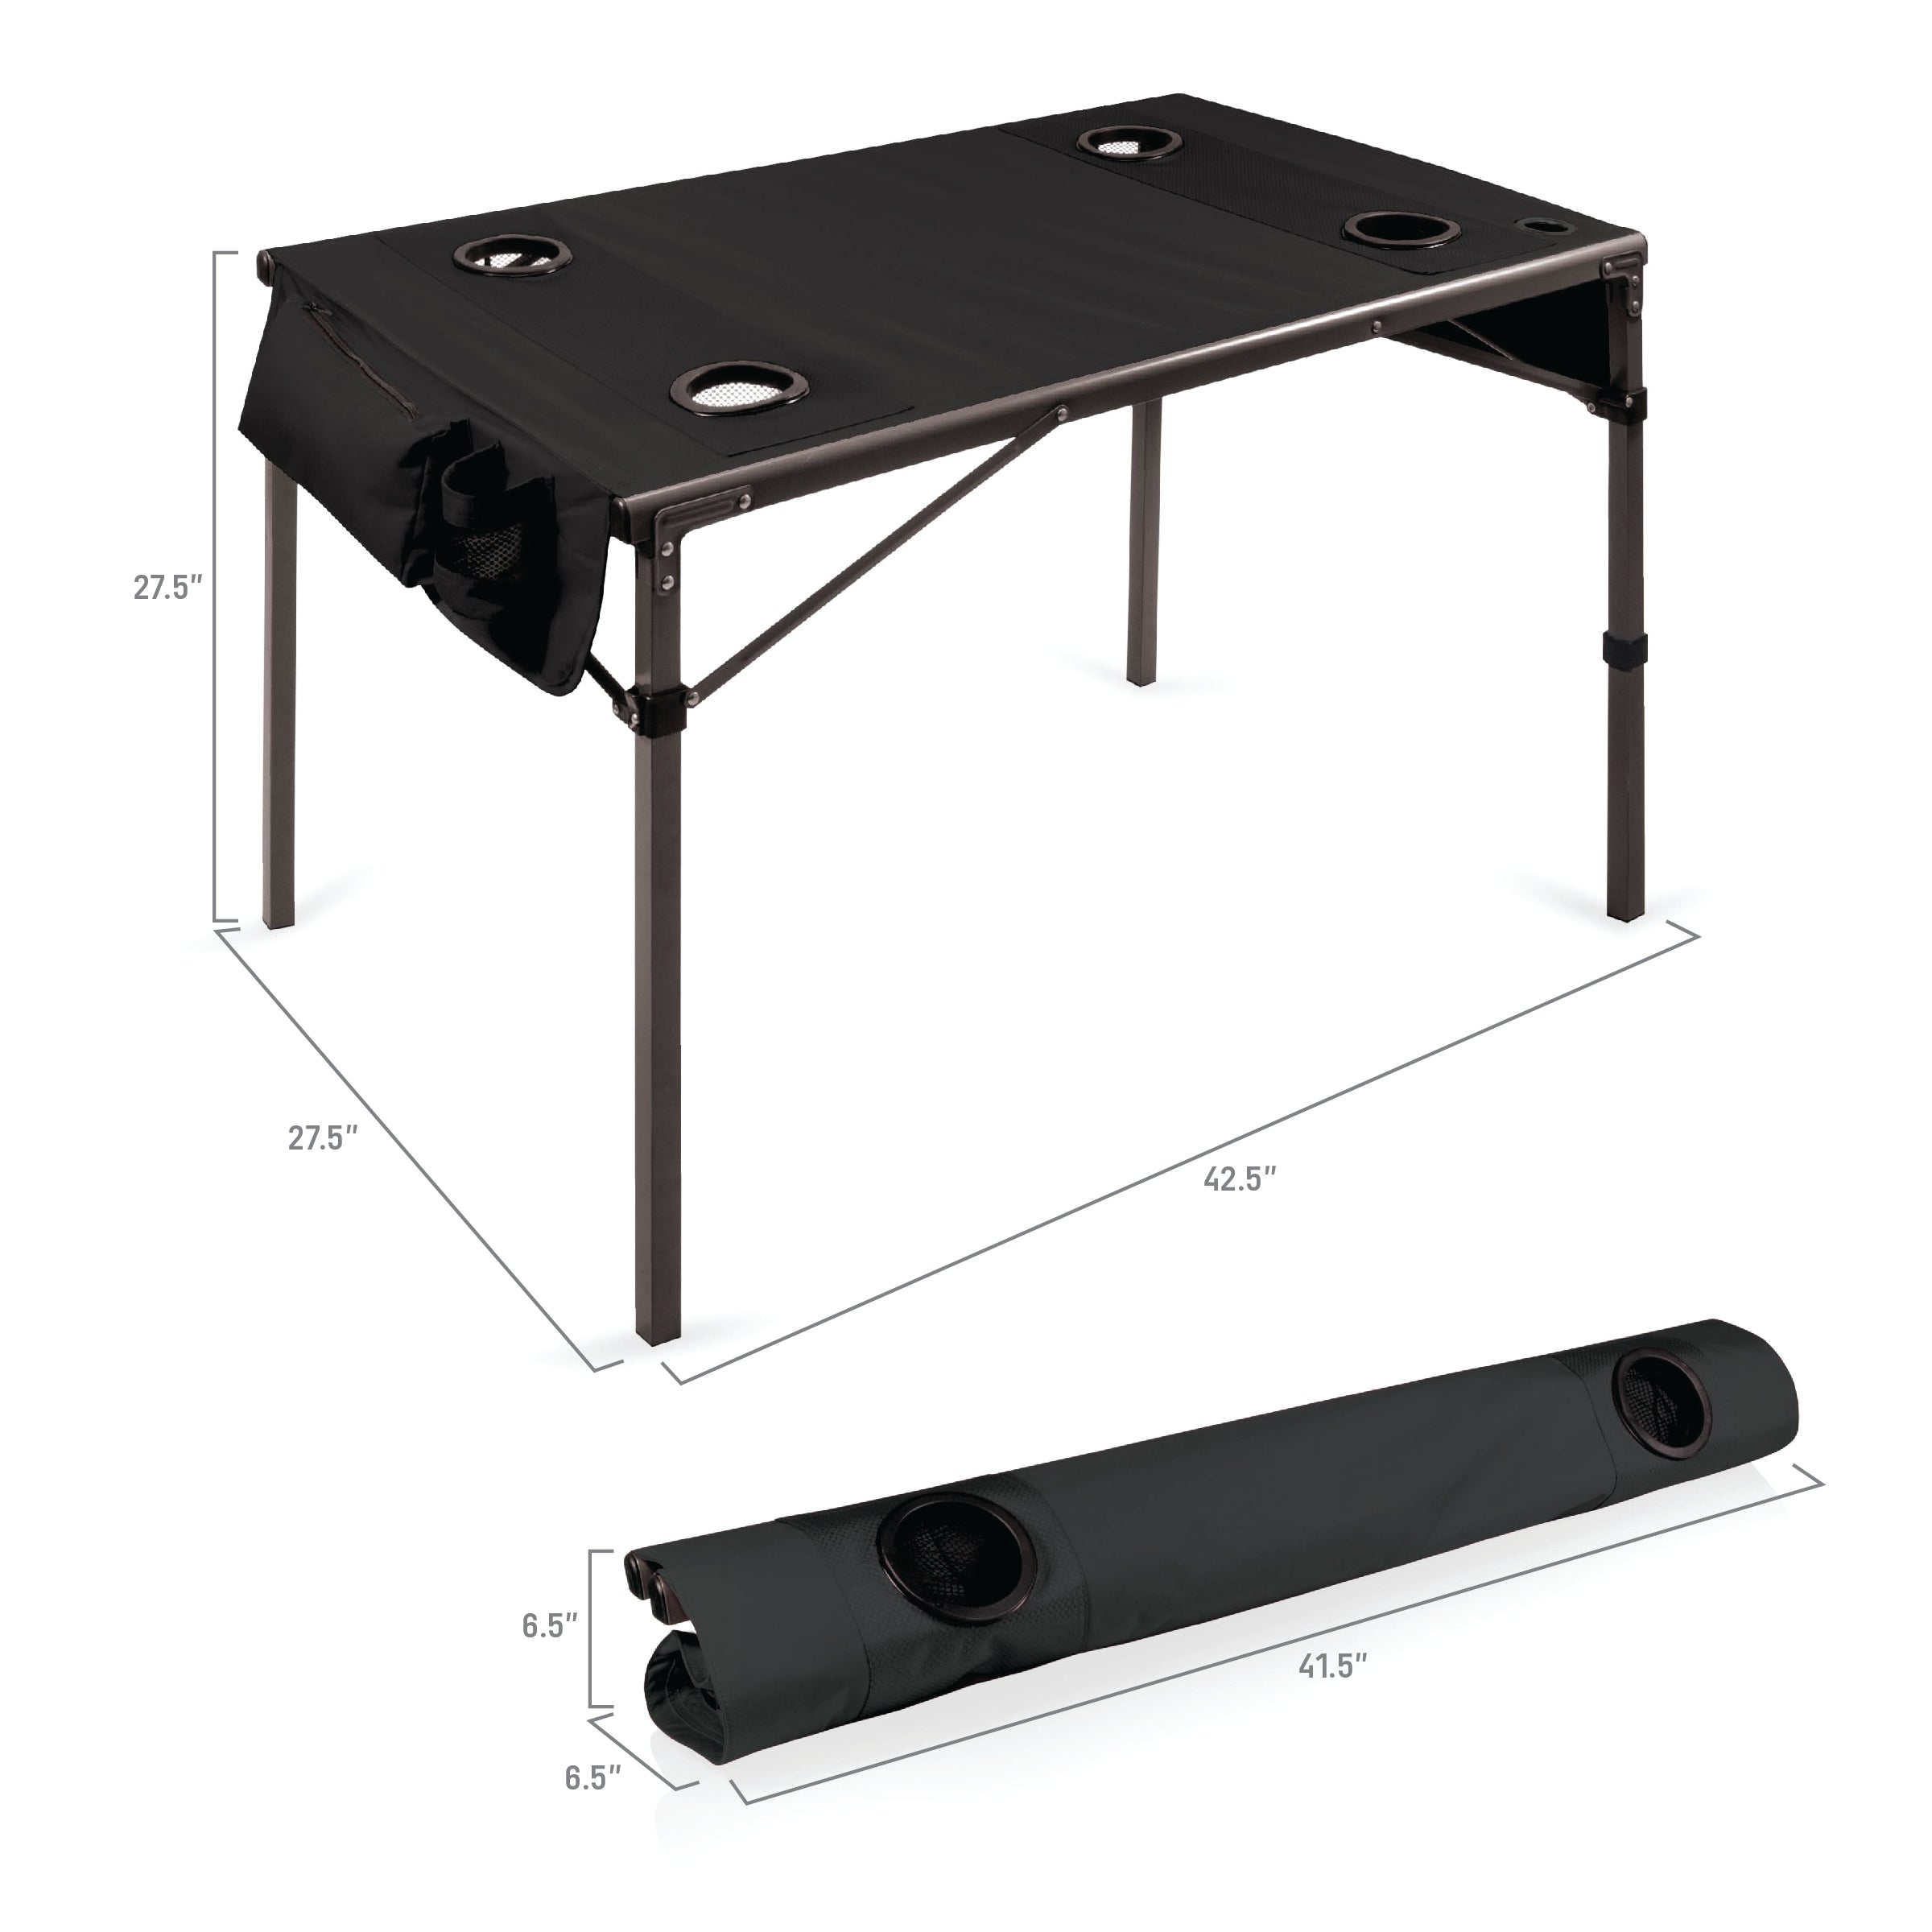 Northwestern Wildcats - Travel Table Portable Folding Table